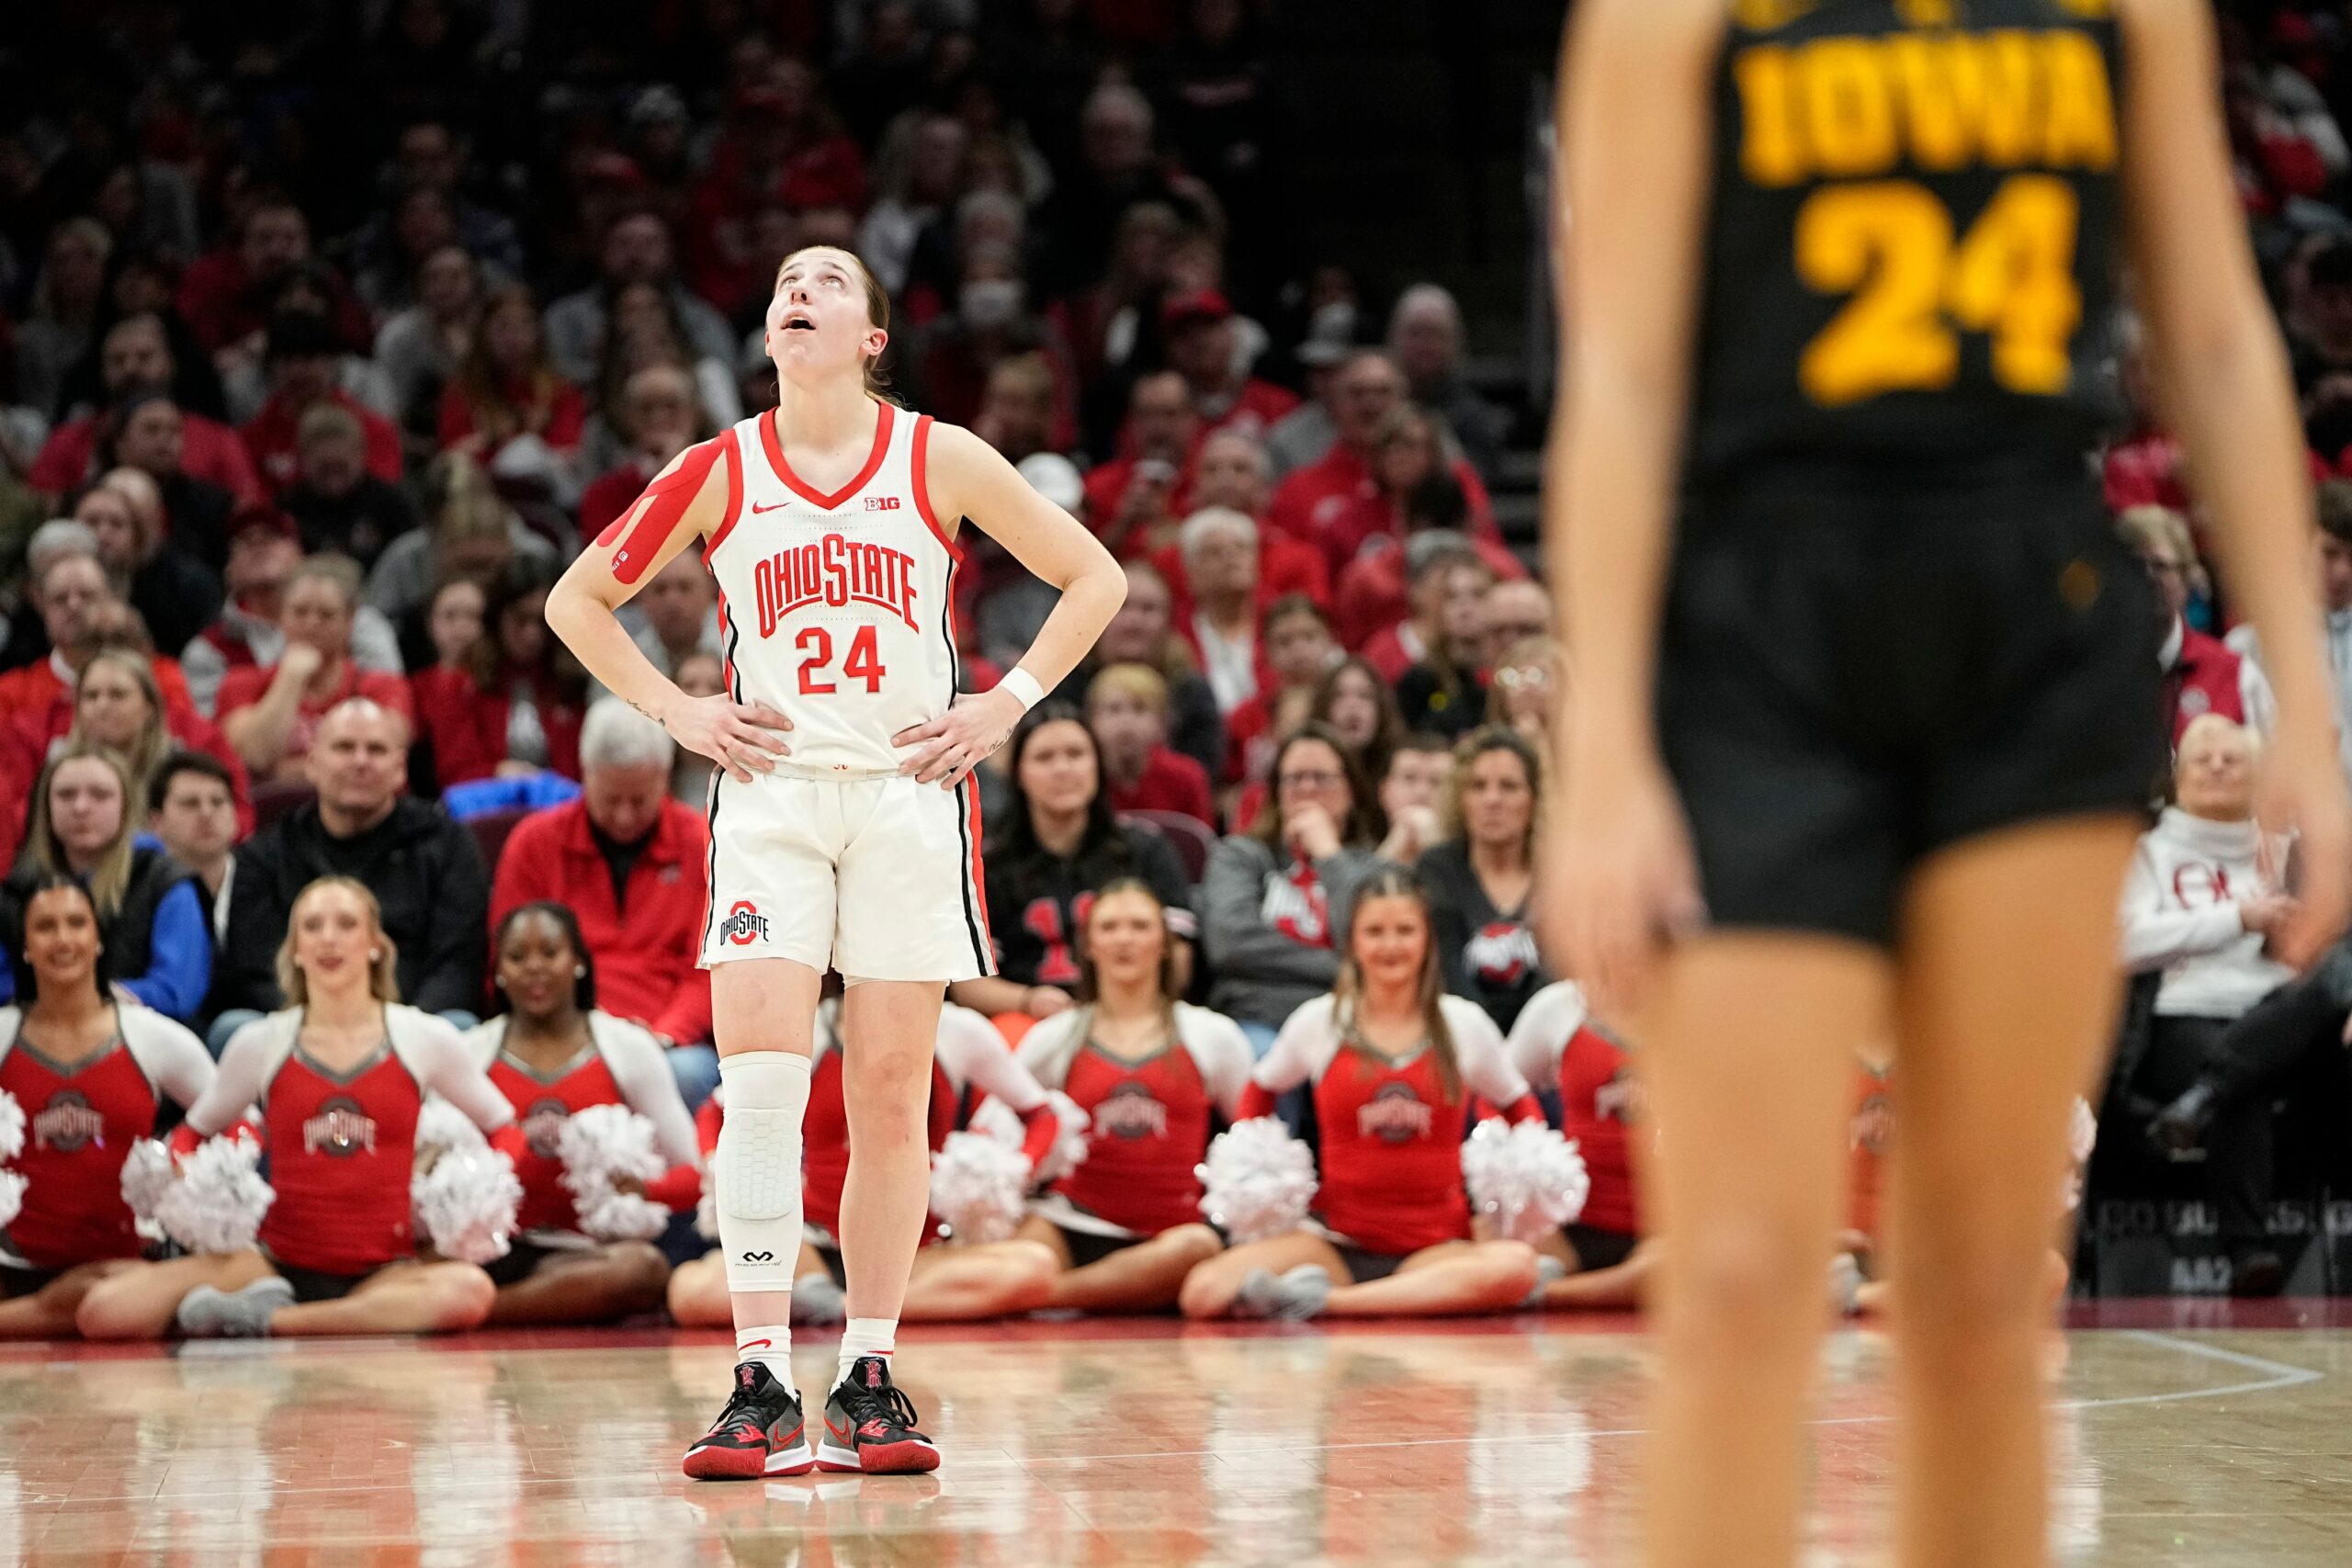 Ohio State women’s basketball vs. Michigan in the Big Ten Tournament: How to watch, stream the game